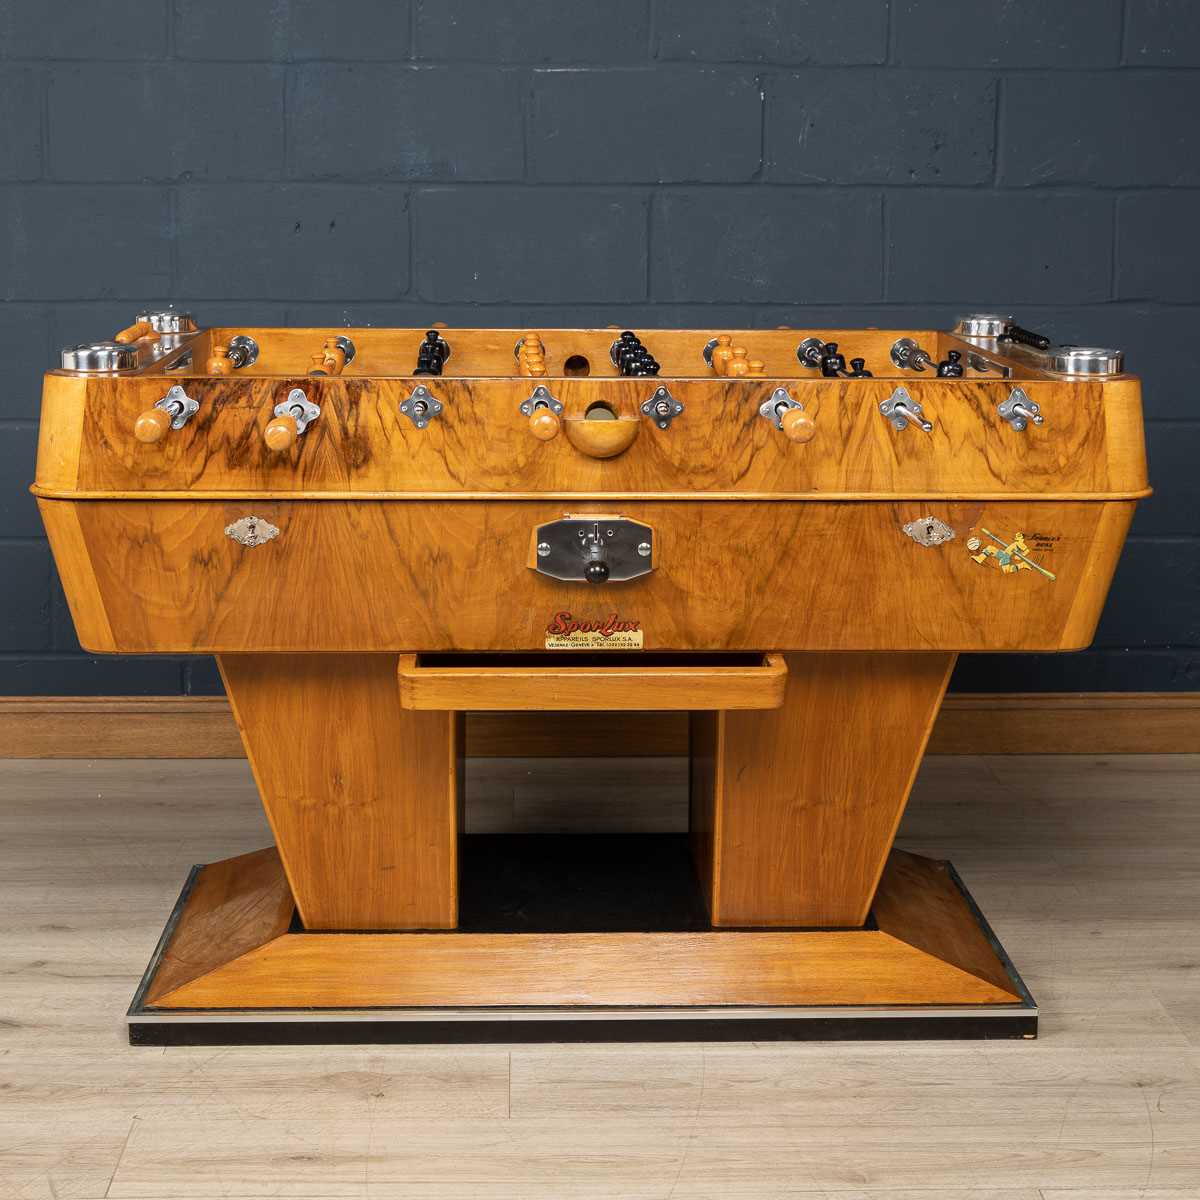 A MID 20TH CENTURY SWISS ART DECO STYLE FOOTBALL TABLE GAME - Image 2 of 37